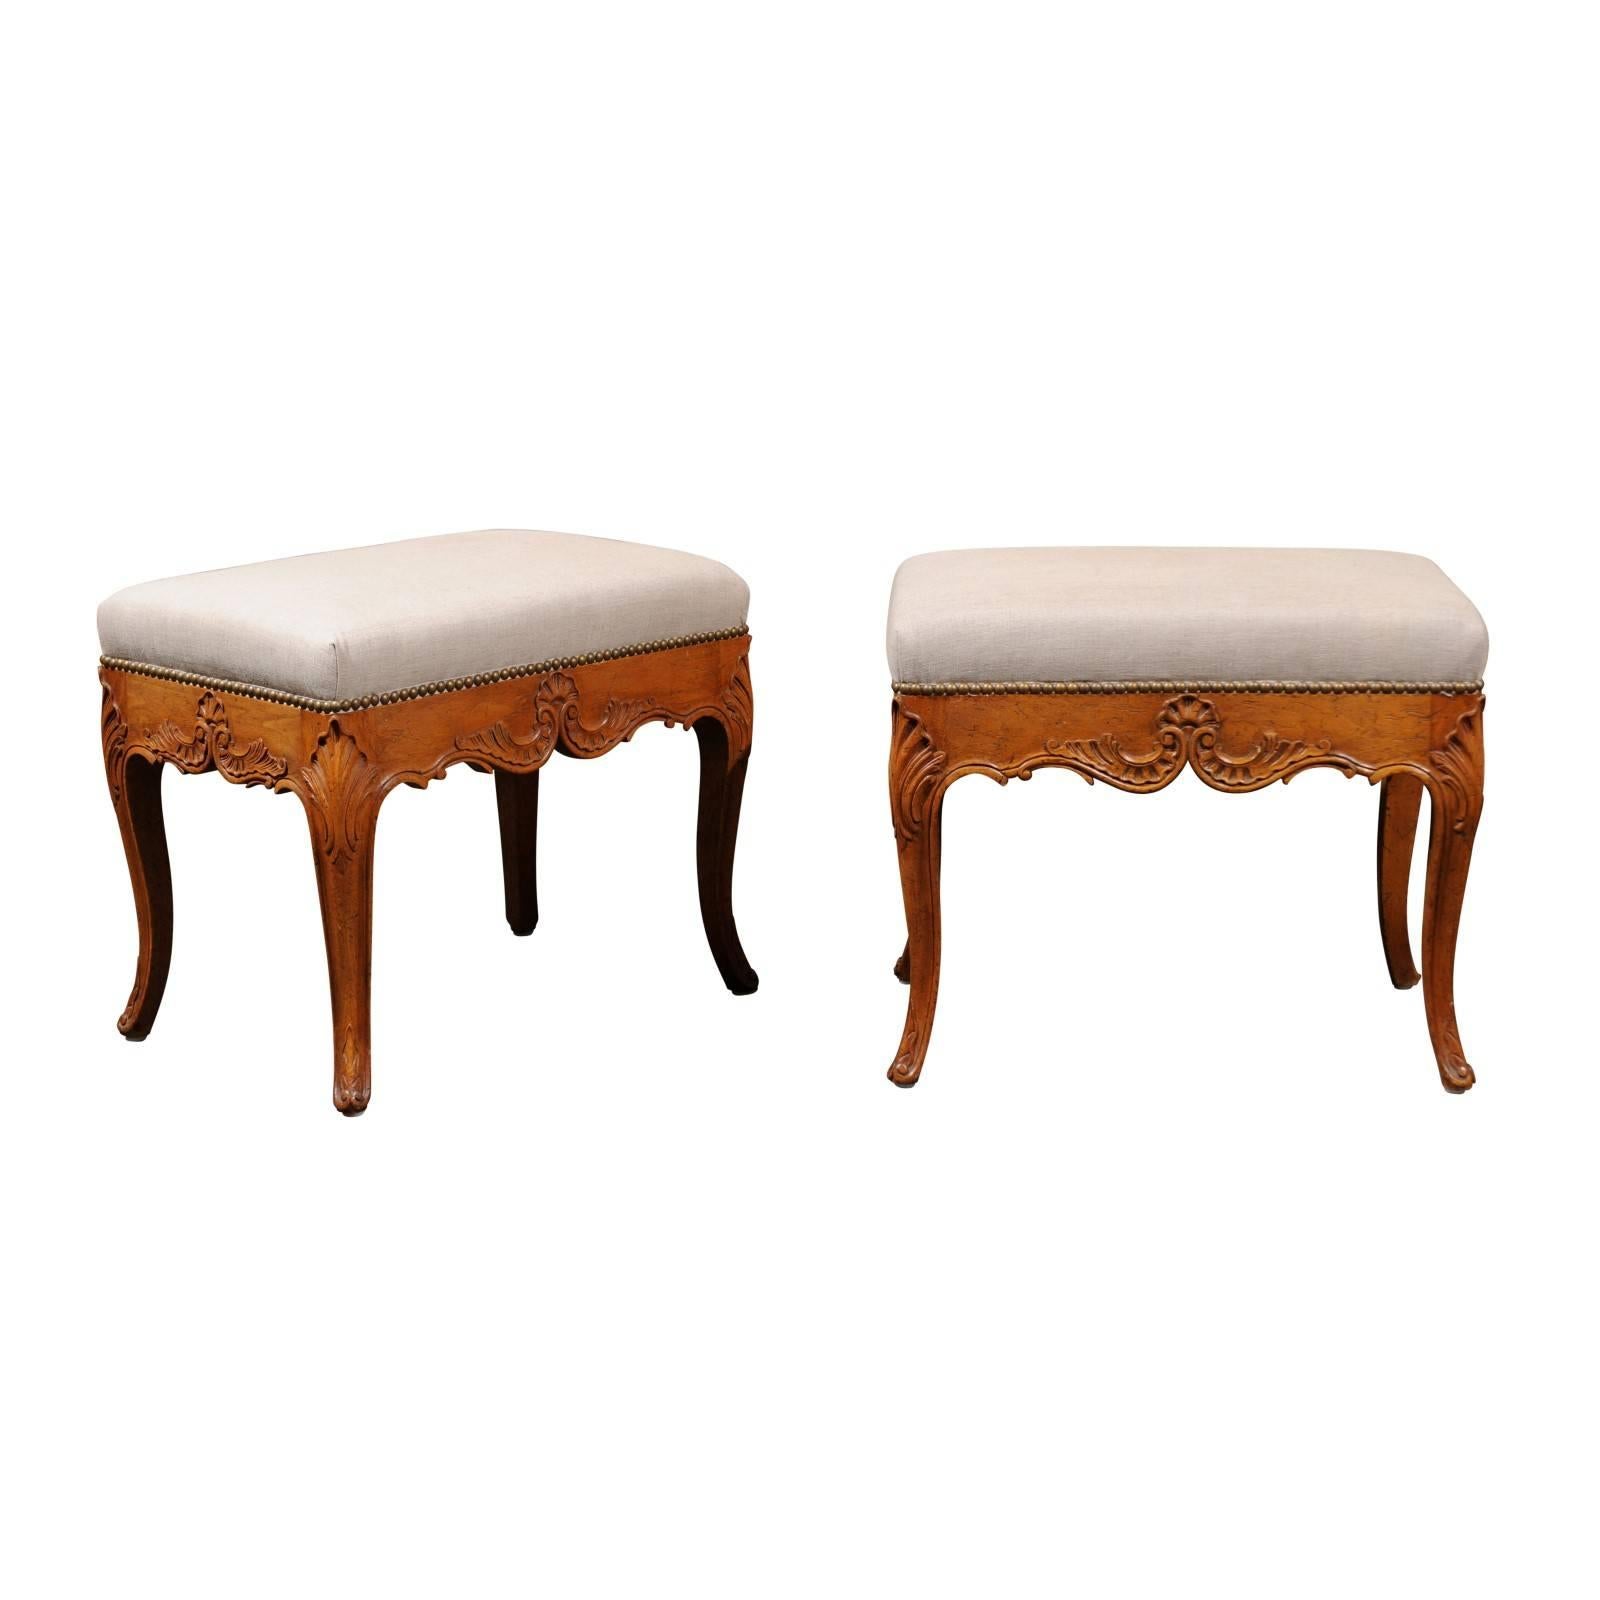 Pair of Rococo Style Italian Carved Walnut Stools with Linen Upholstered Seats